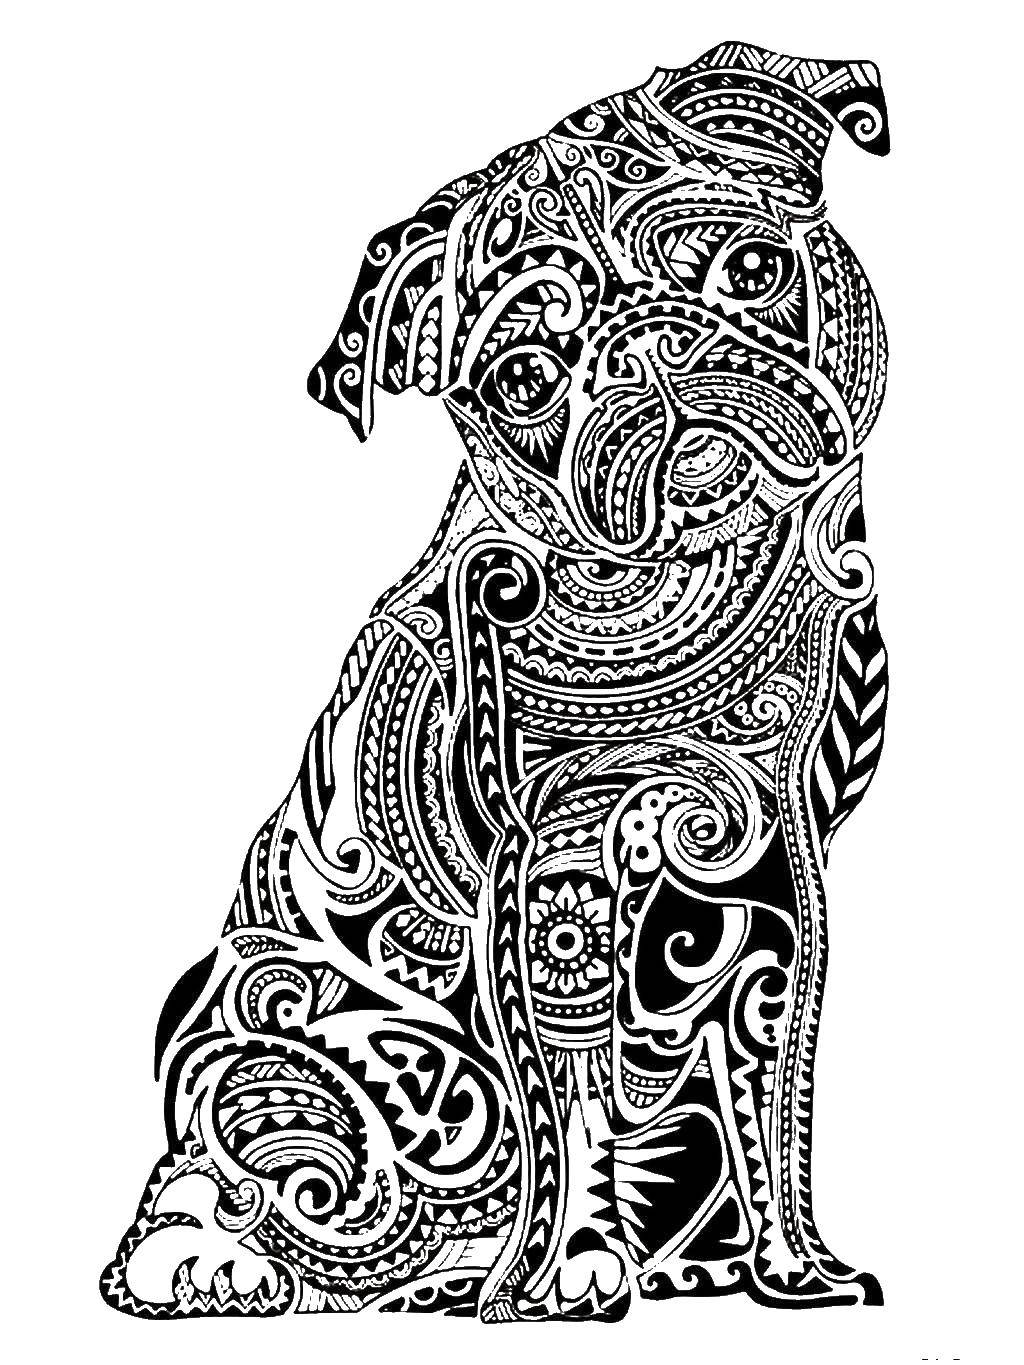 Coloring Pug patterns. Category patterns. Tags:  Patterns, animals.